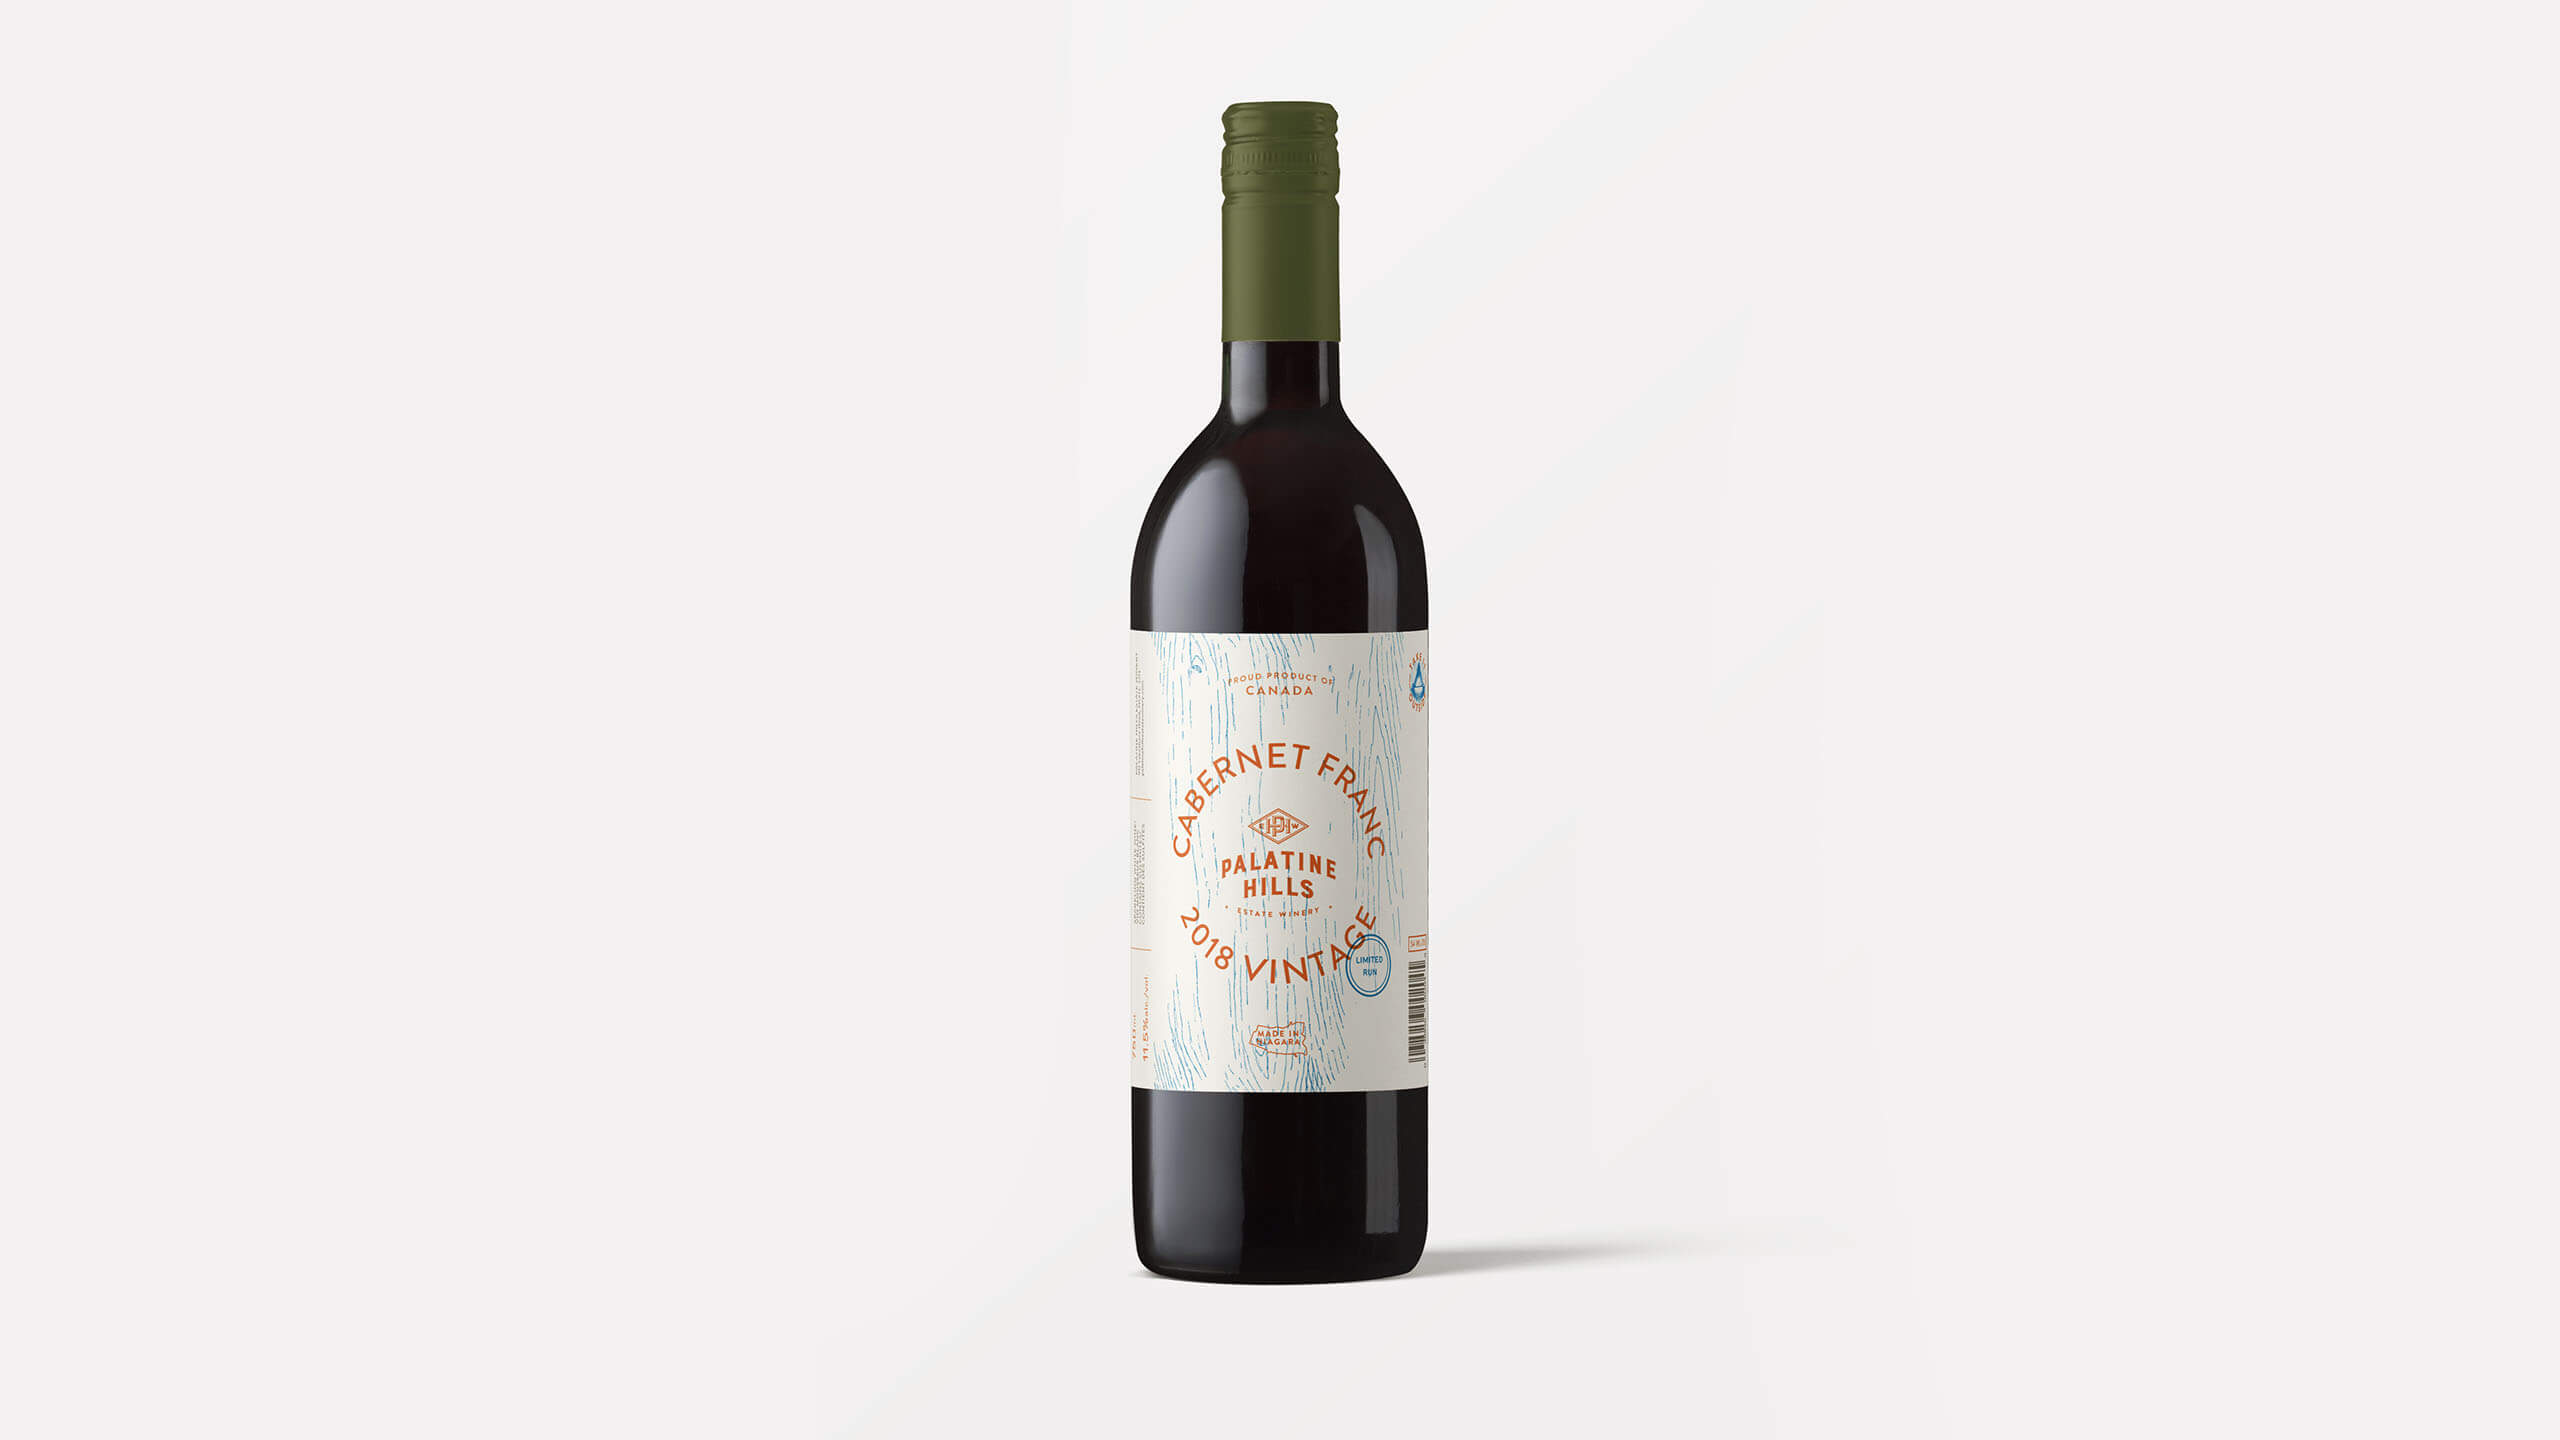 Cabernet Franc label design by The Coopers